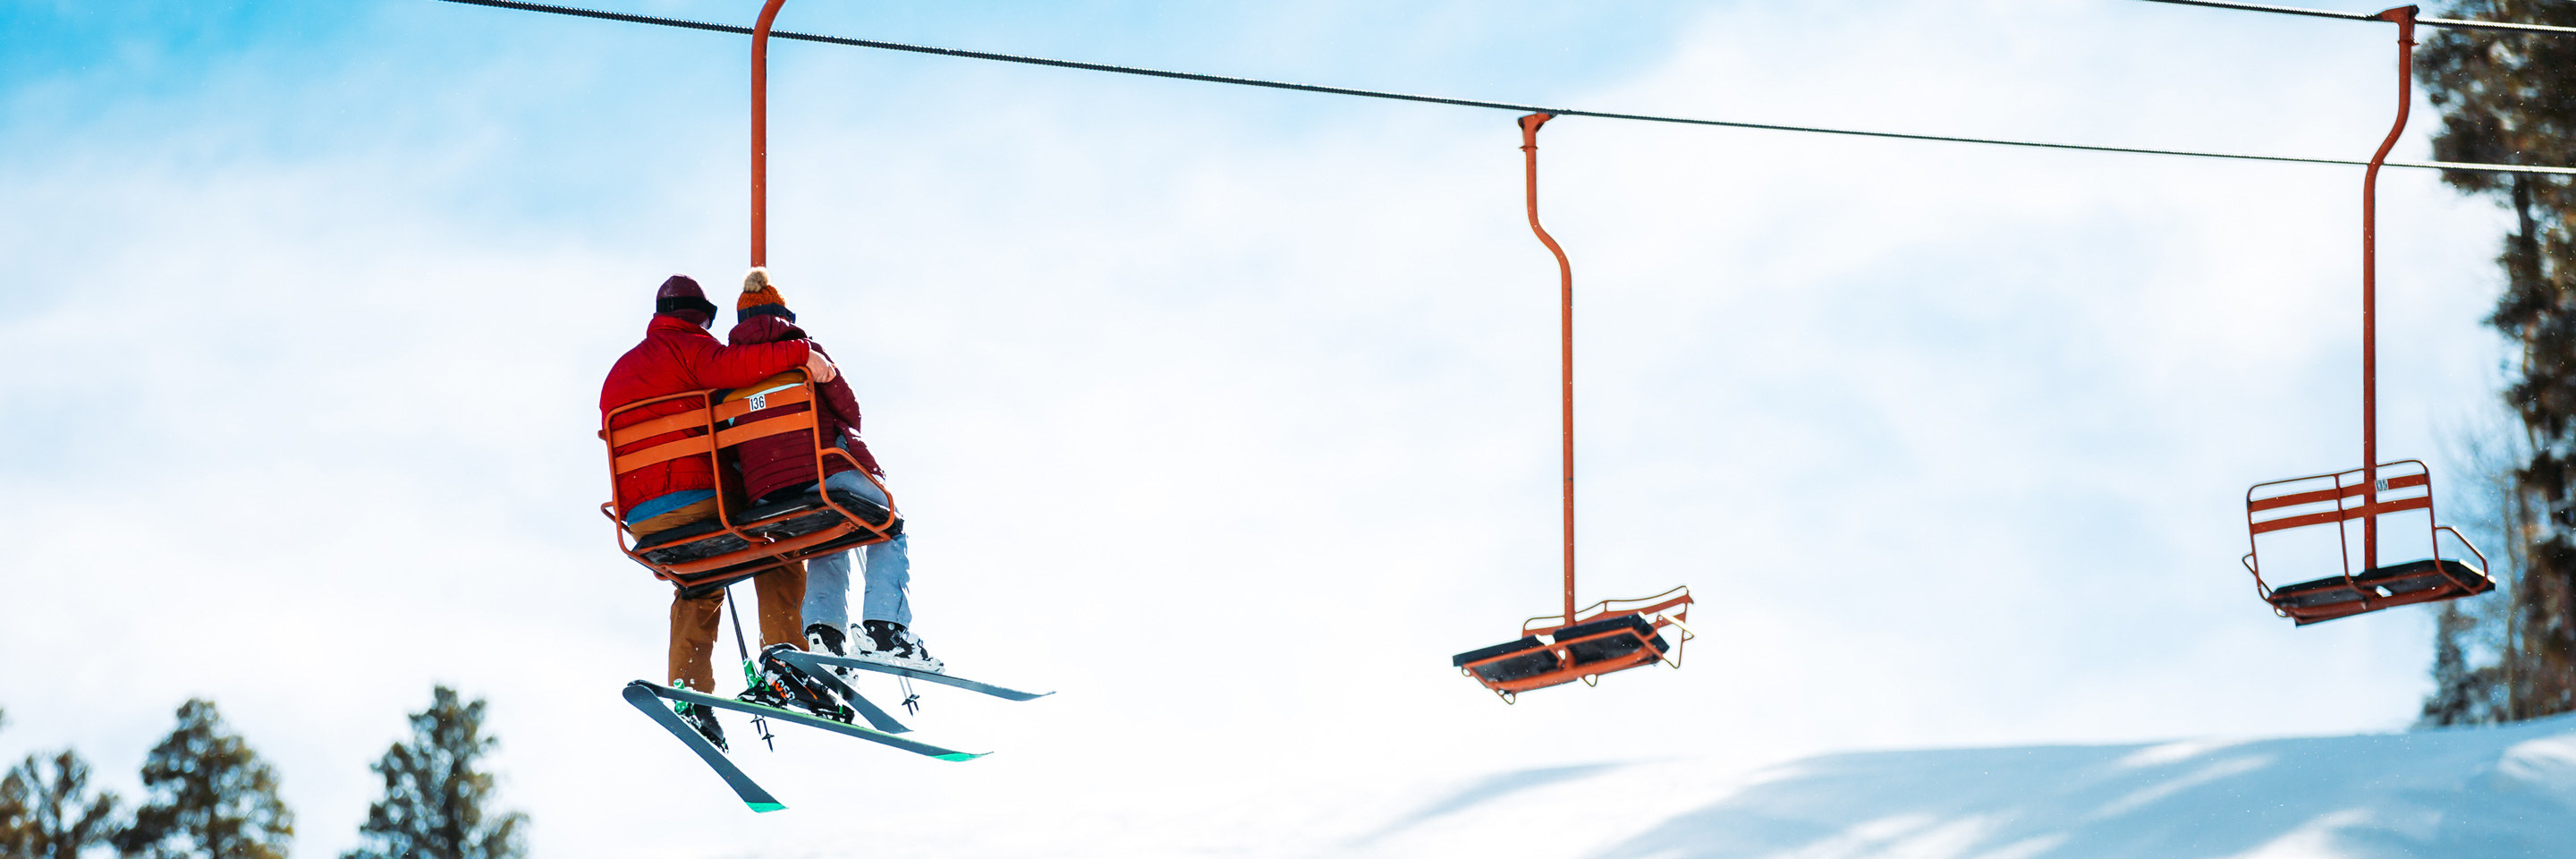 two skiers riding a chairlift